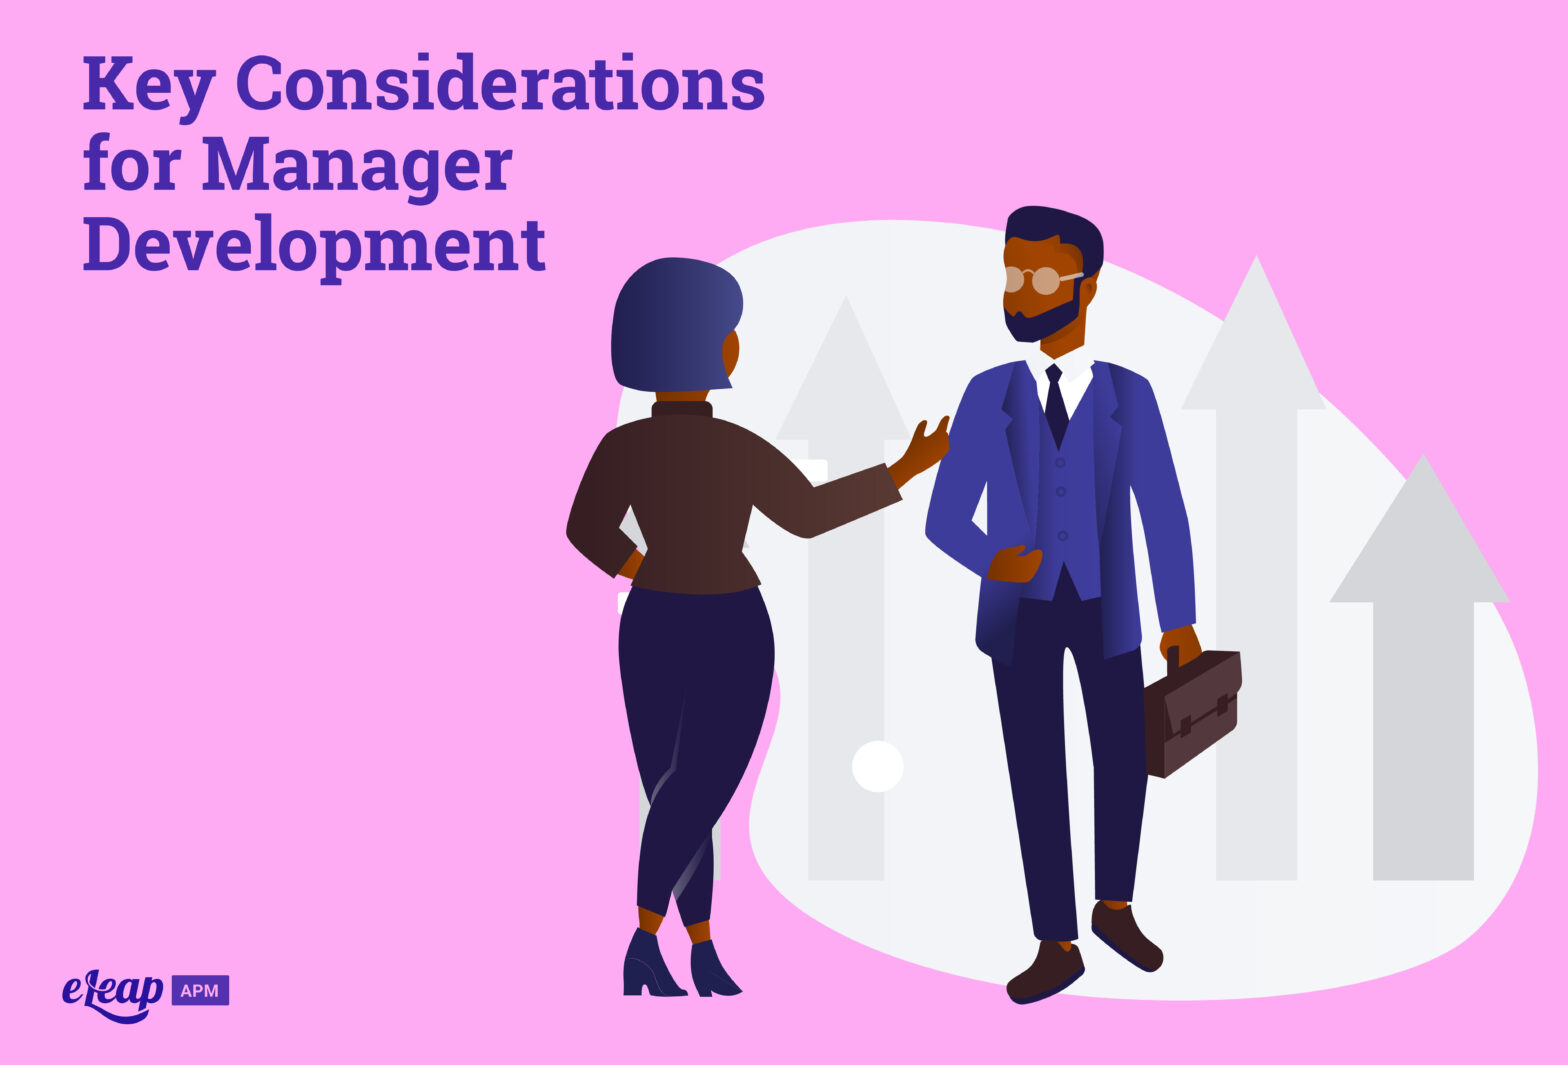 Key Considerations for Manager Development